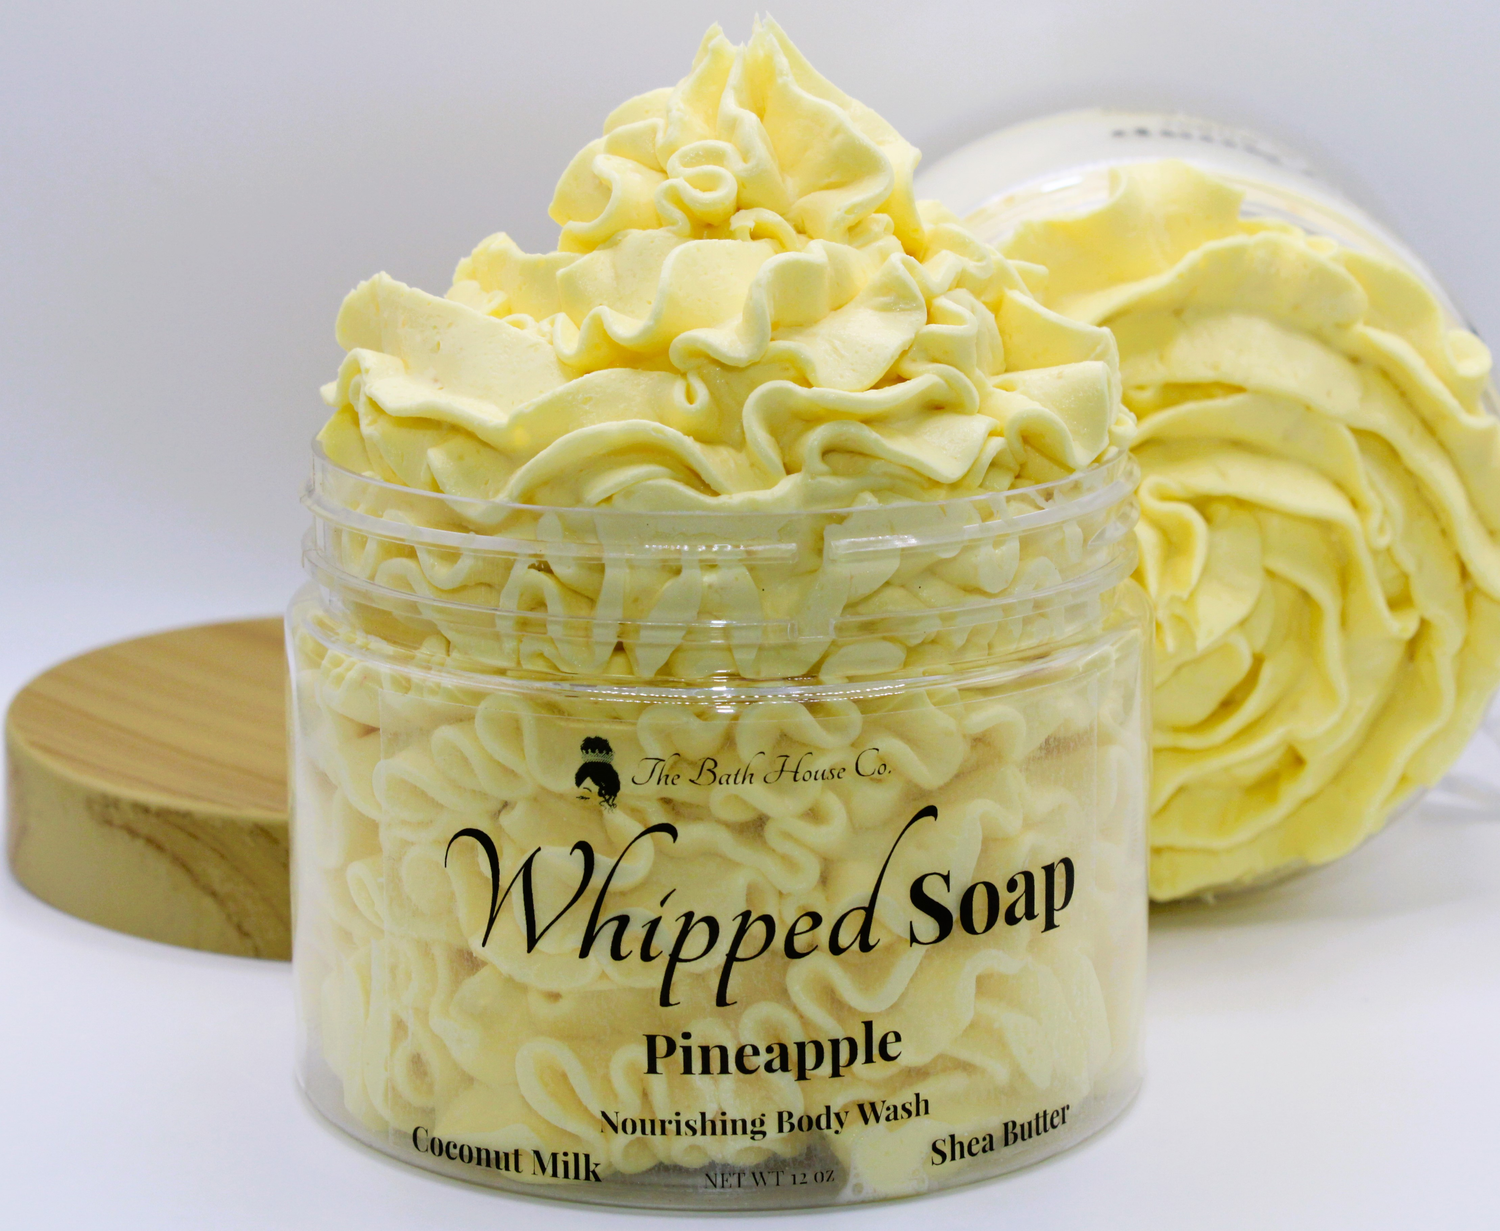 Whipped Soap Body Wash